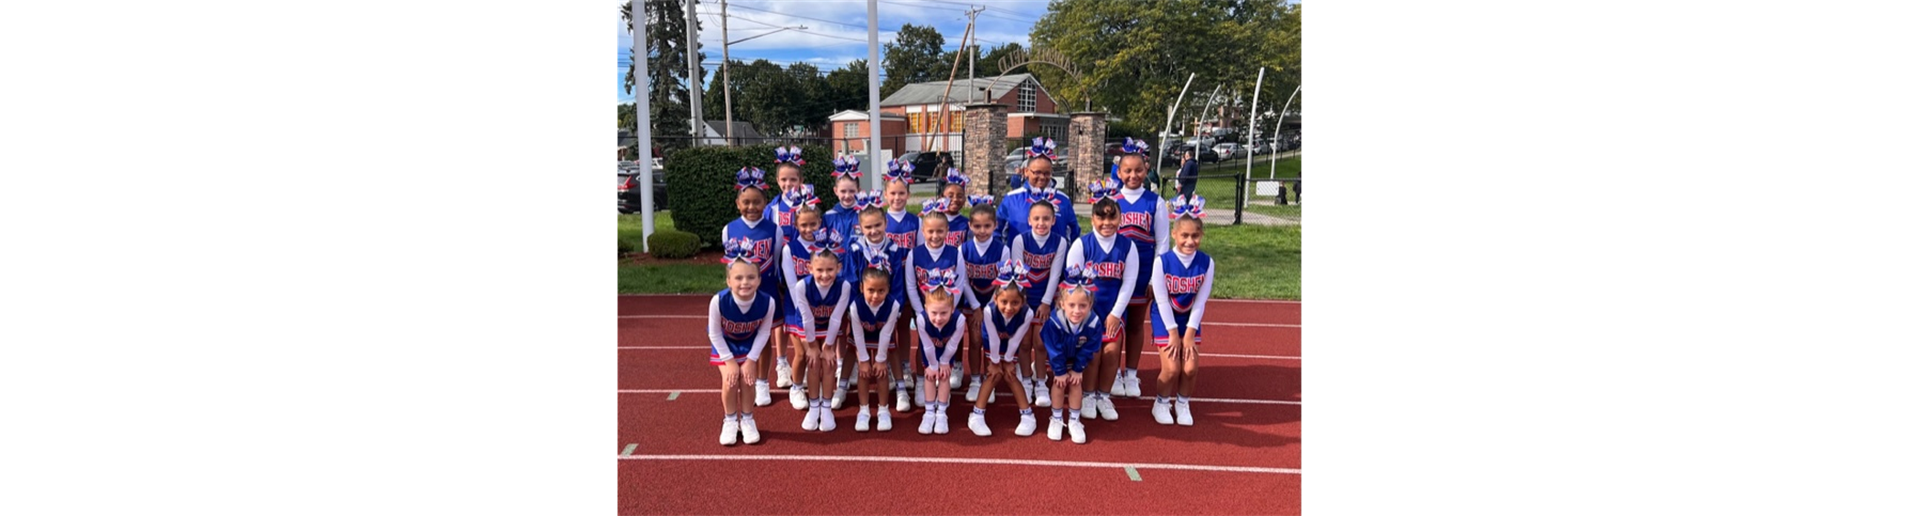 Goshen Youth Football and Cheer